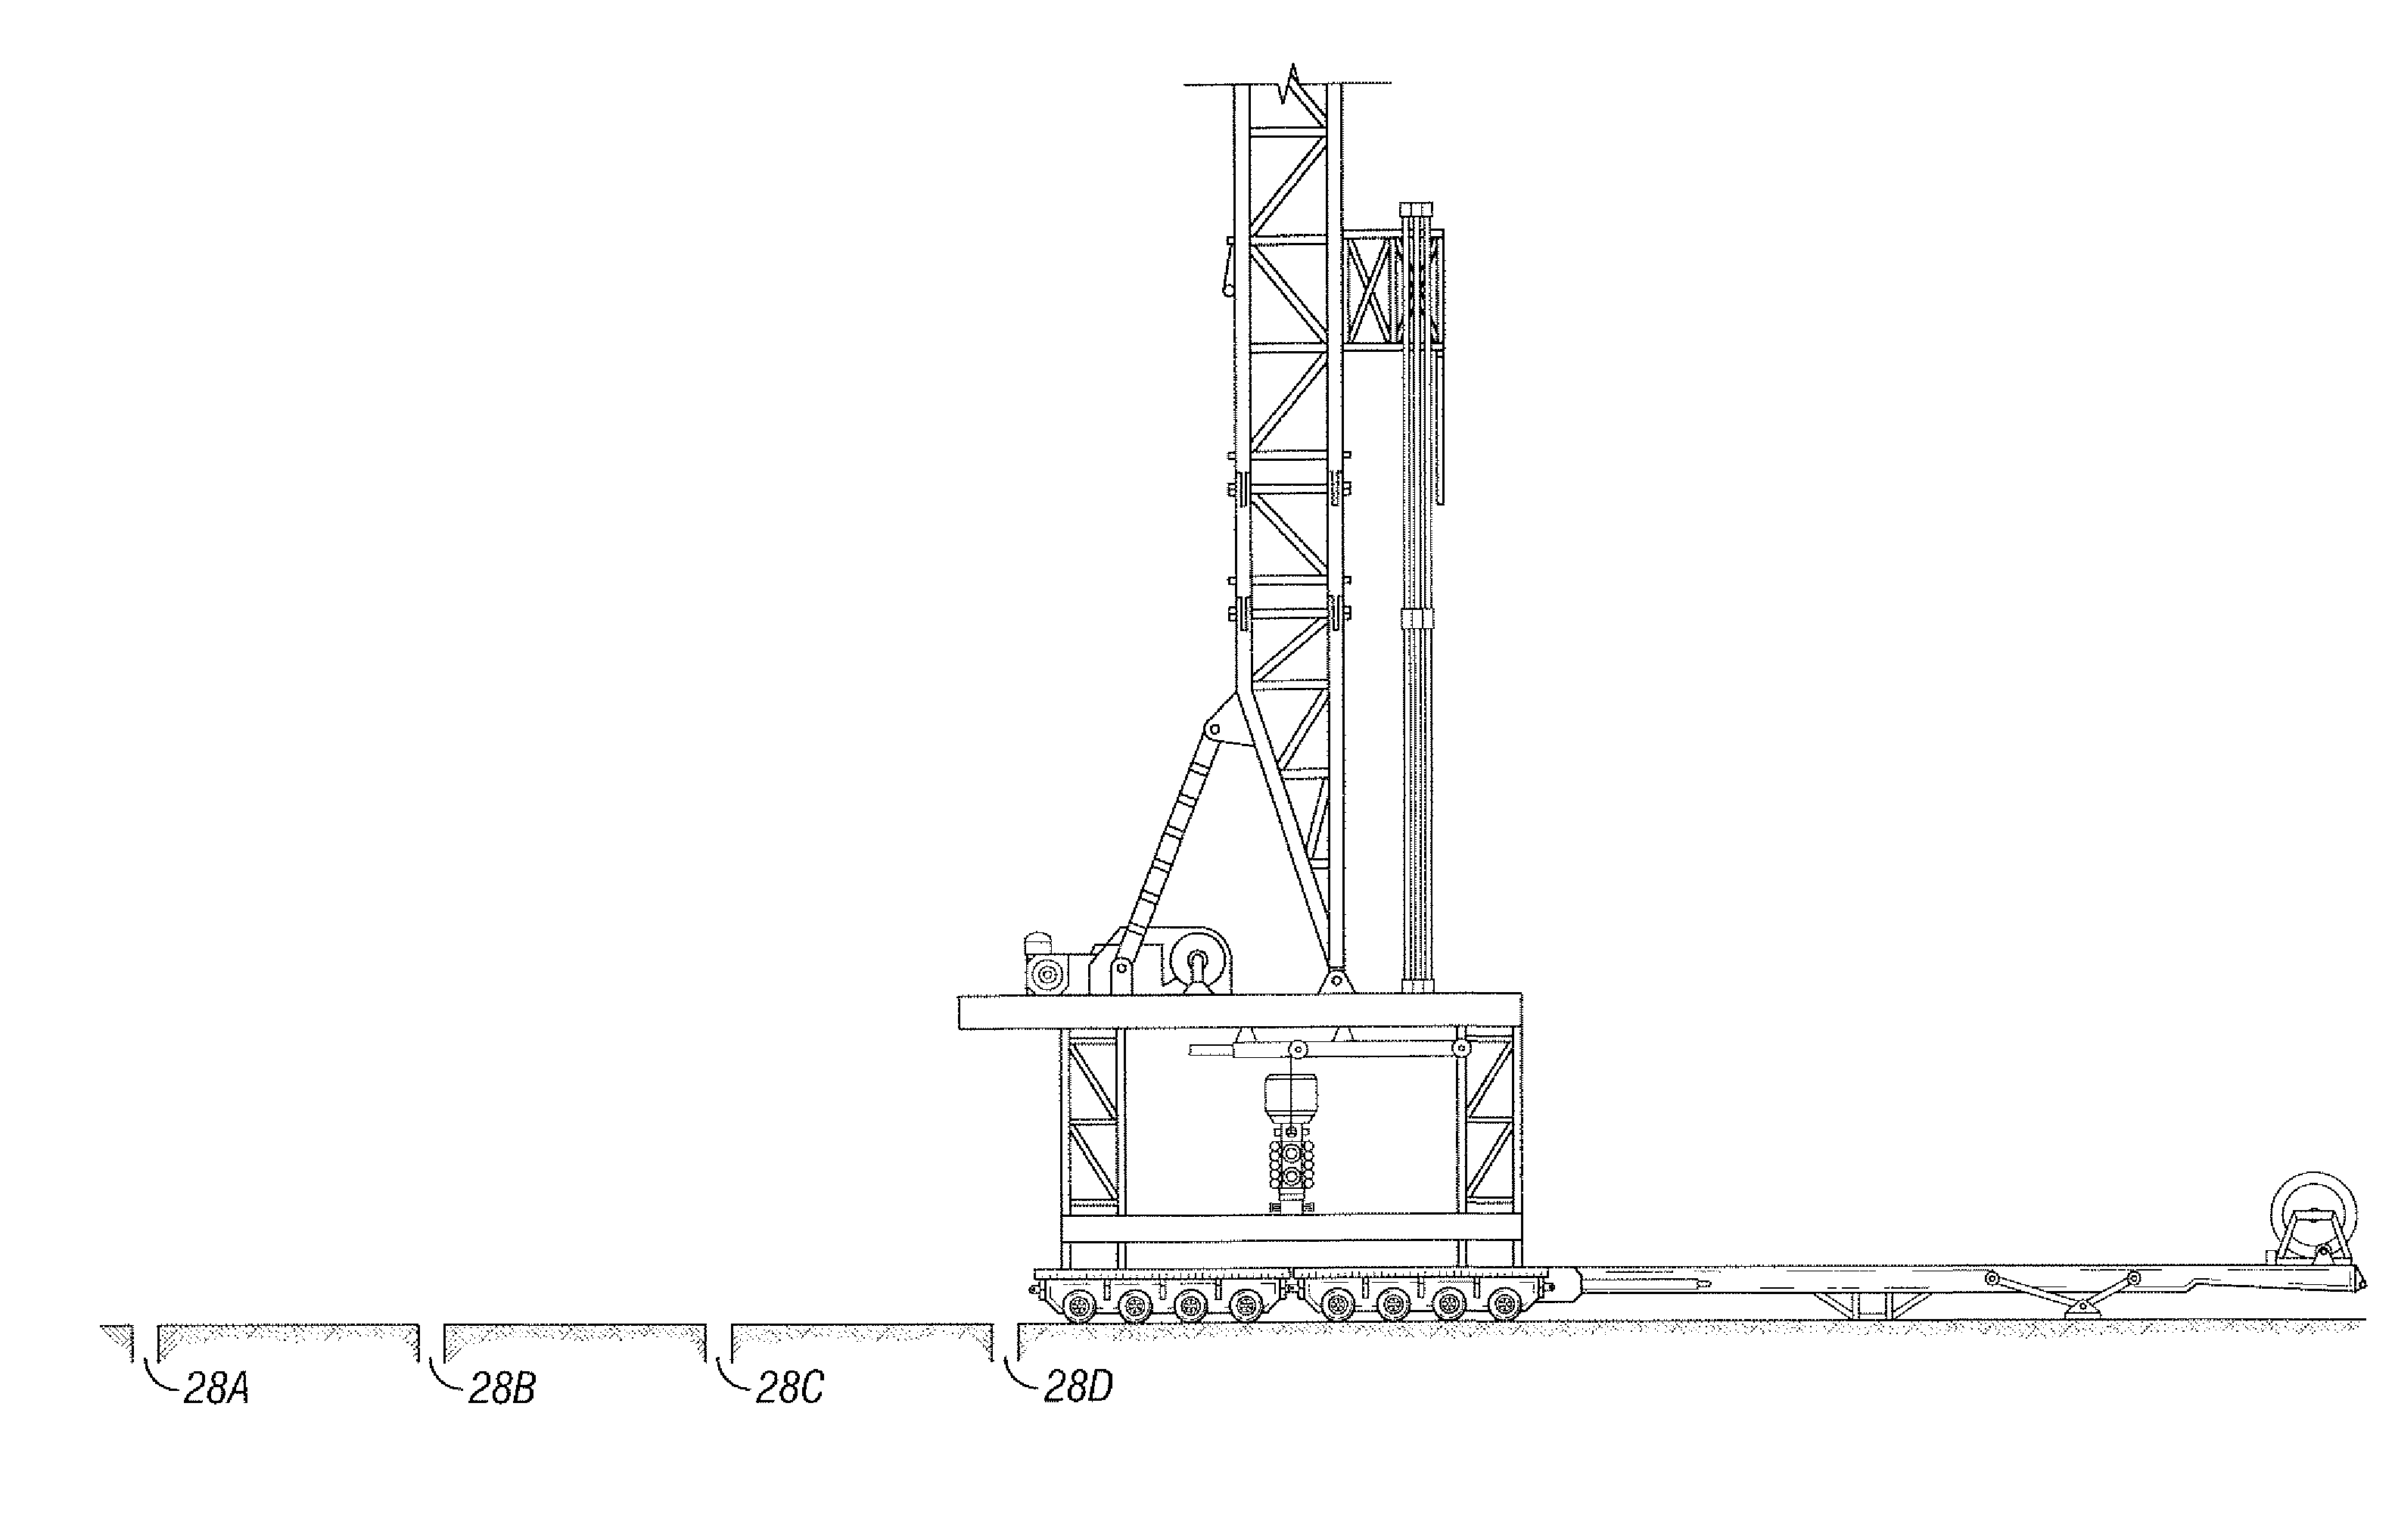 Drilling rig with hinged, retractable outriggers